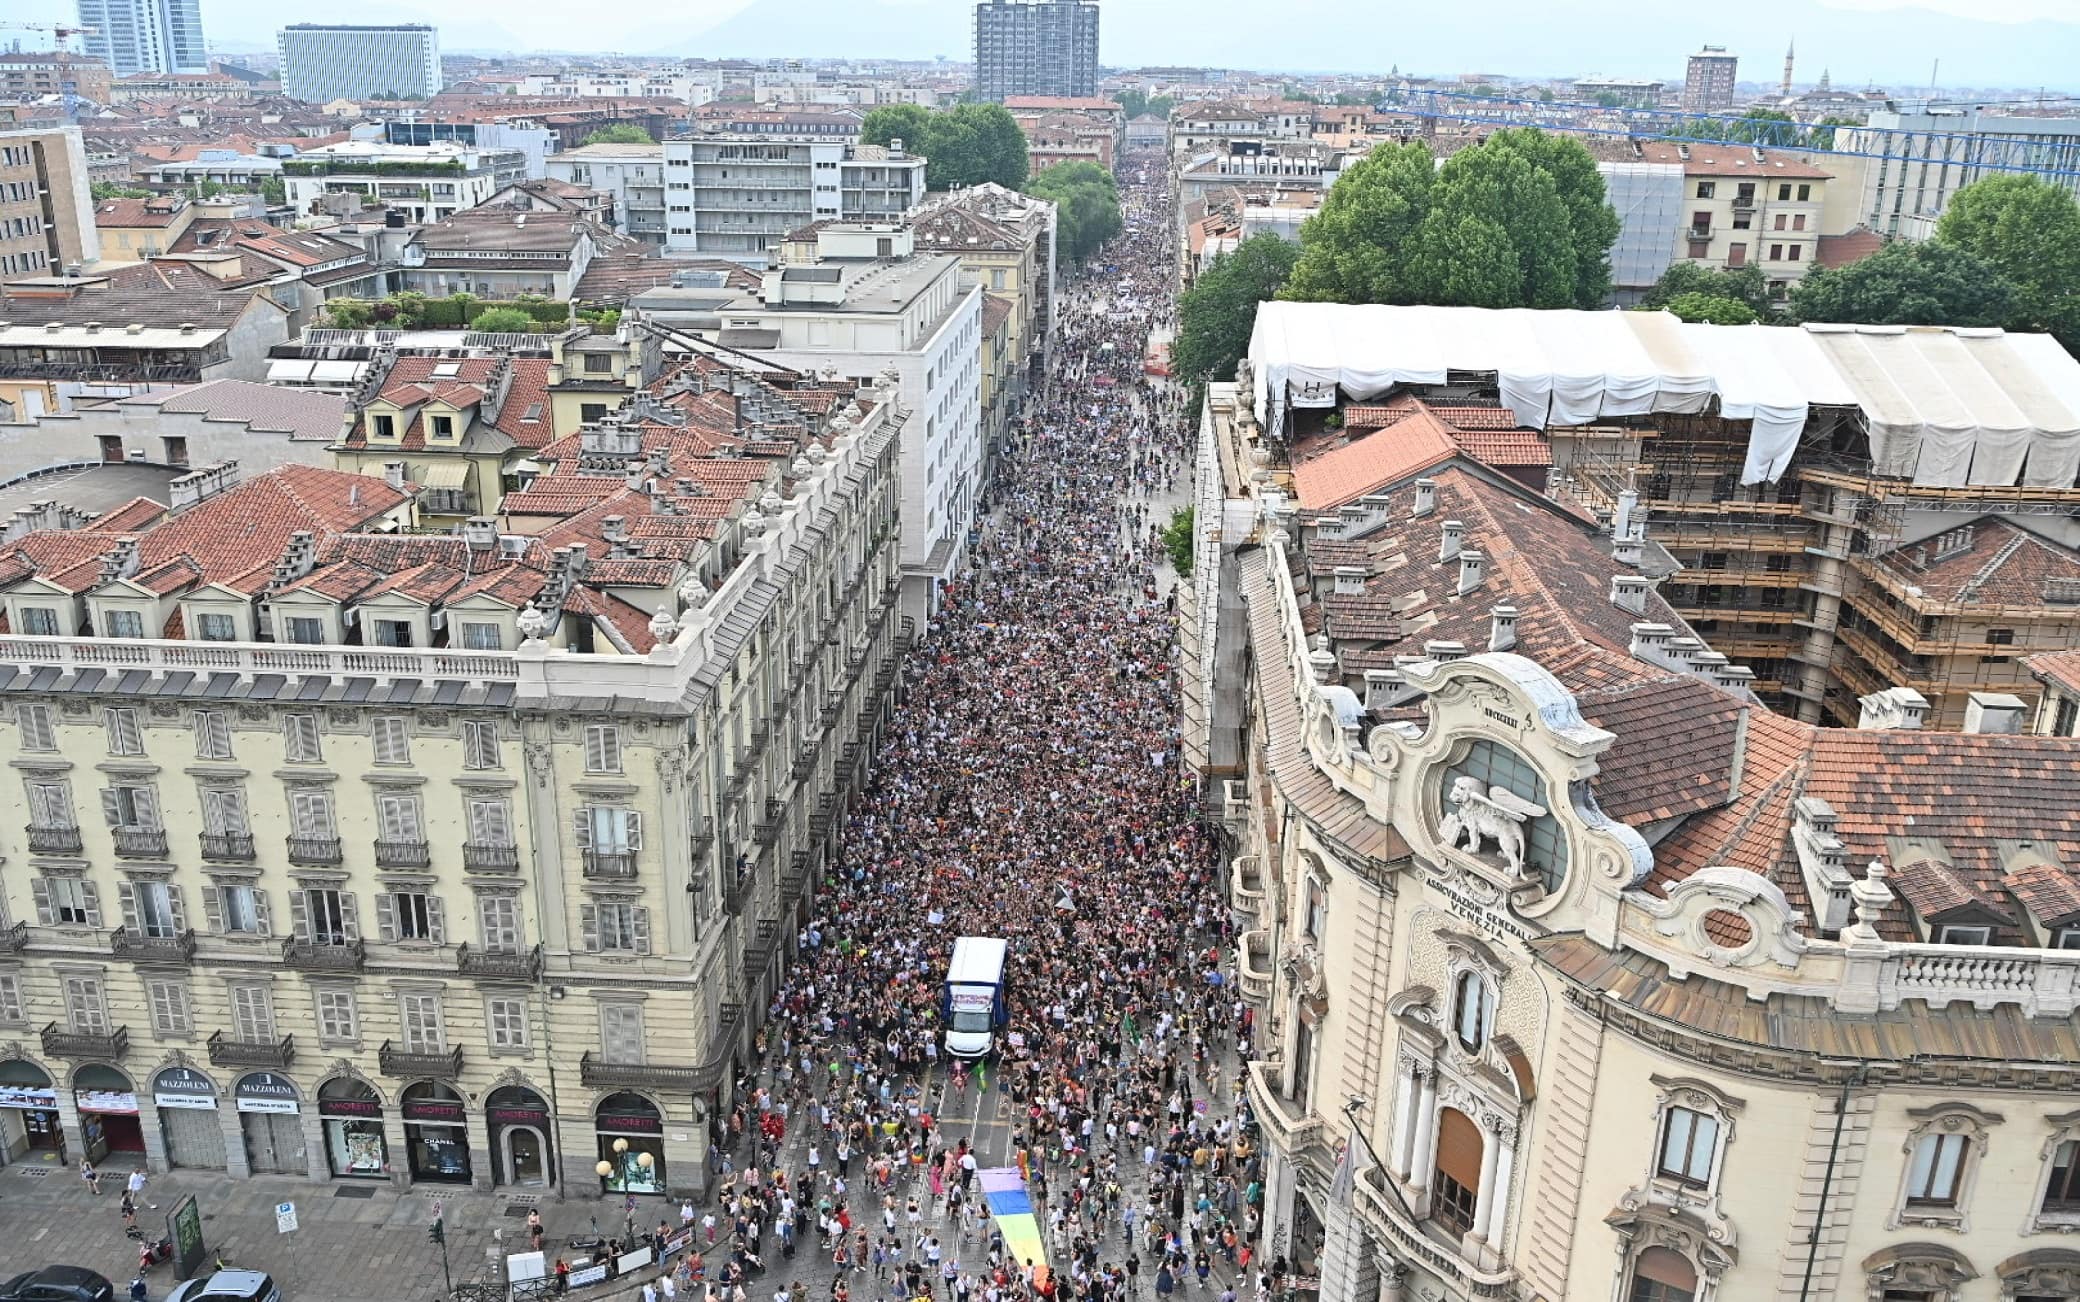 People attend the Turin Pride parade in Turin, Italy, 18 June 2022. Pride month is celebrated across the world every year in the month of June to raise awareness and promote equal rights for the LGBTQ community.  ANSA / Alessandro Di Marco